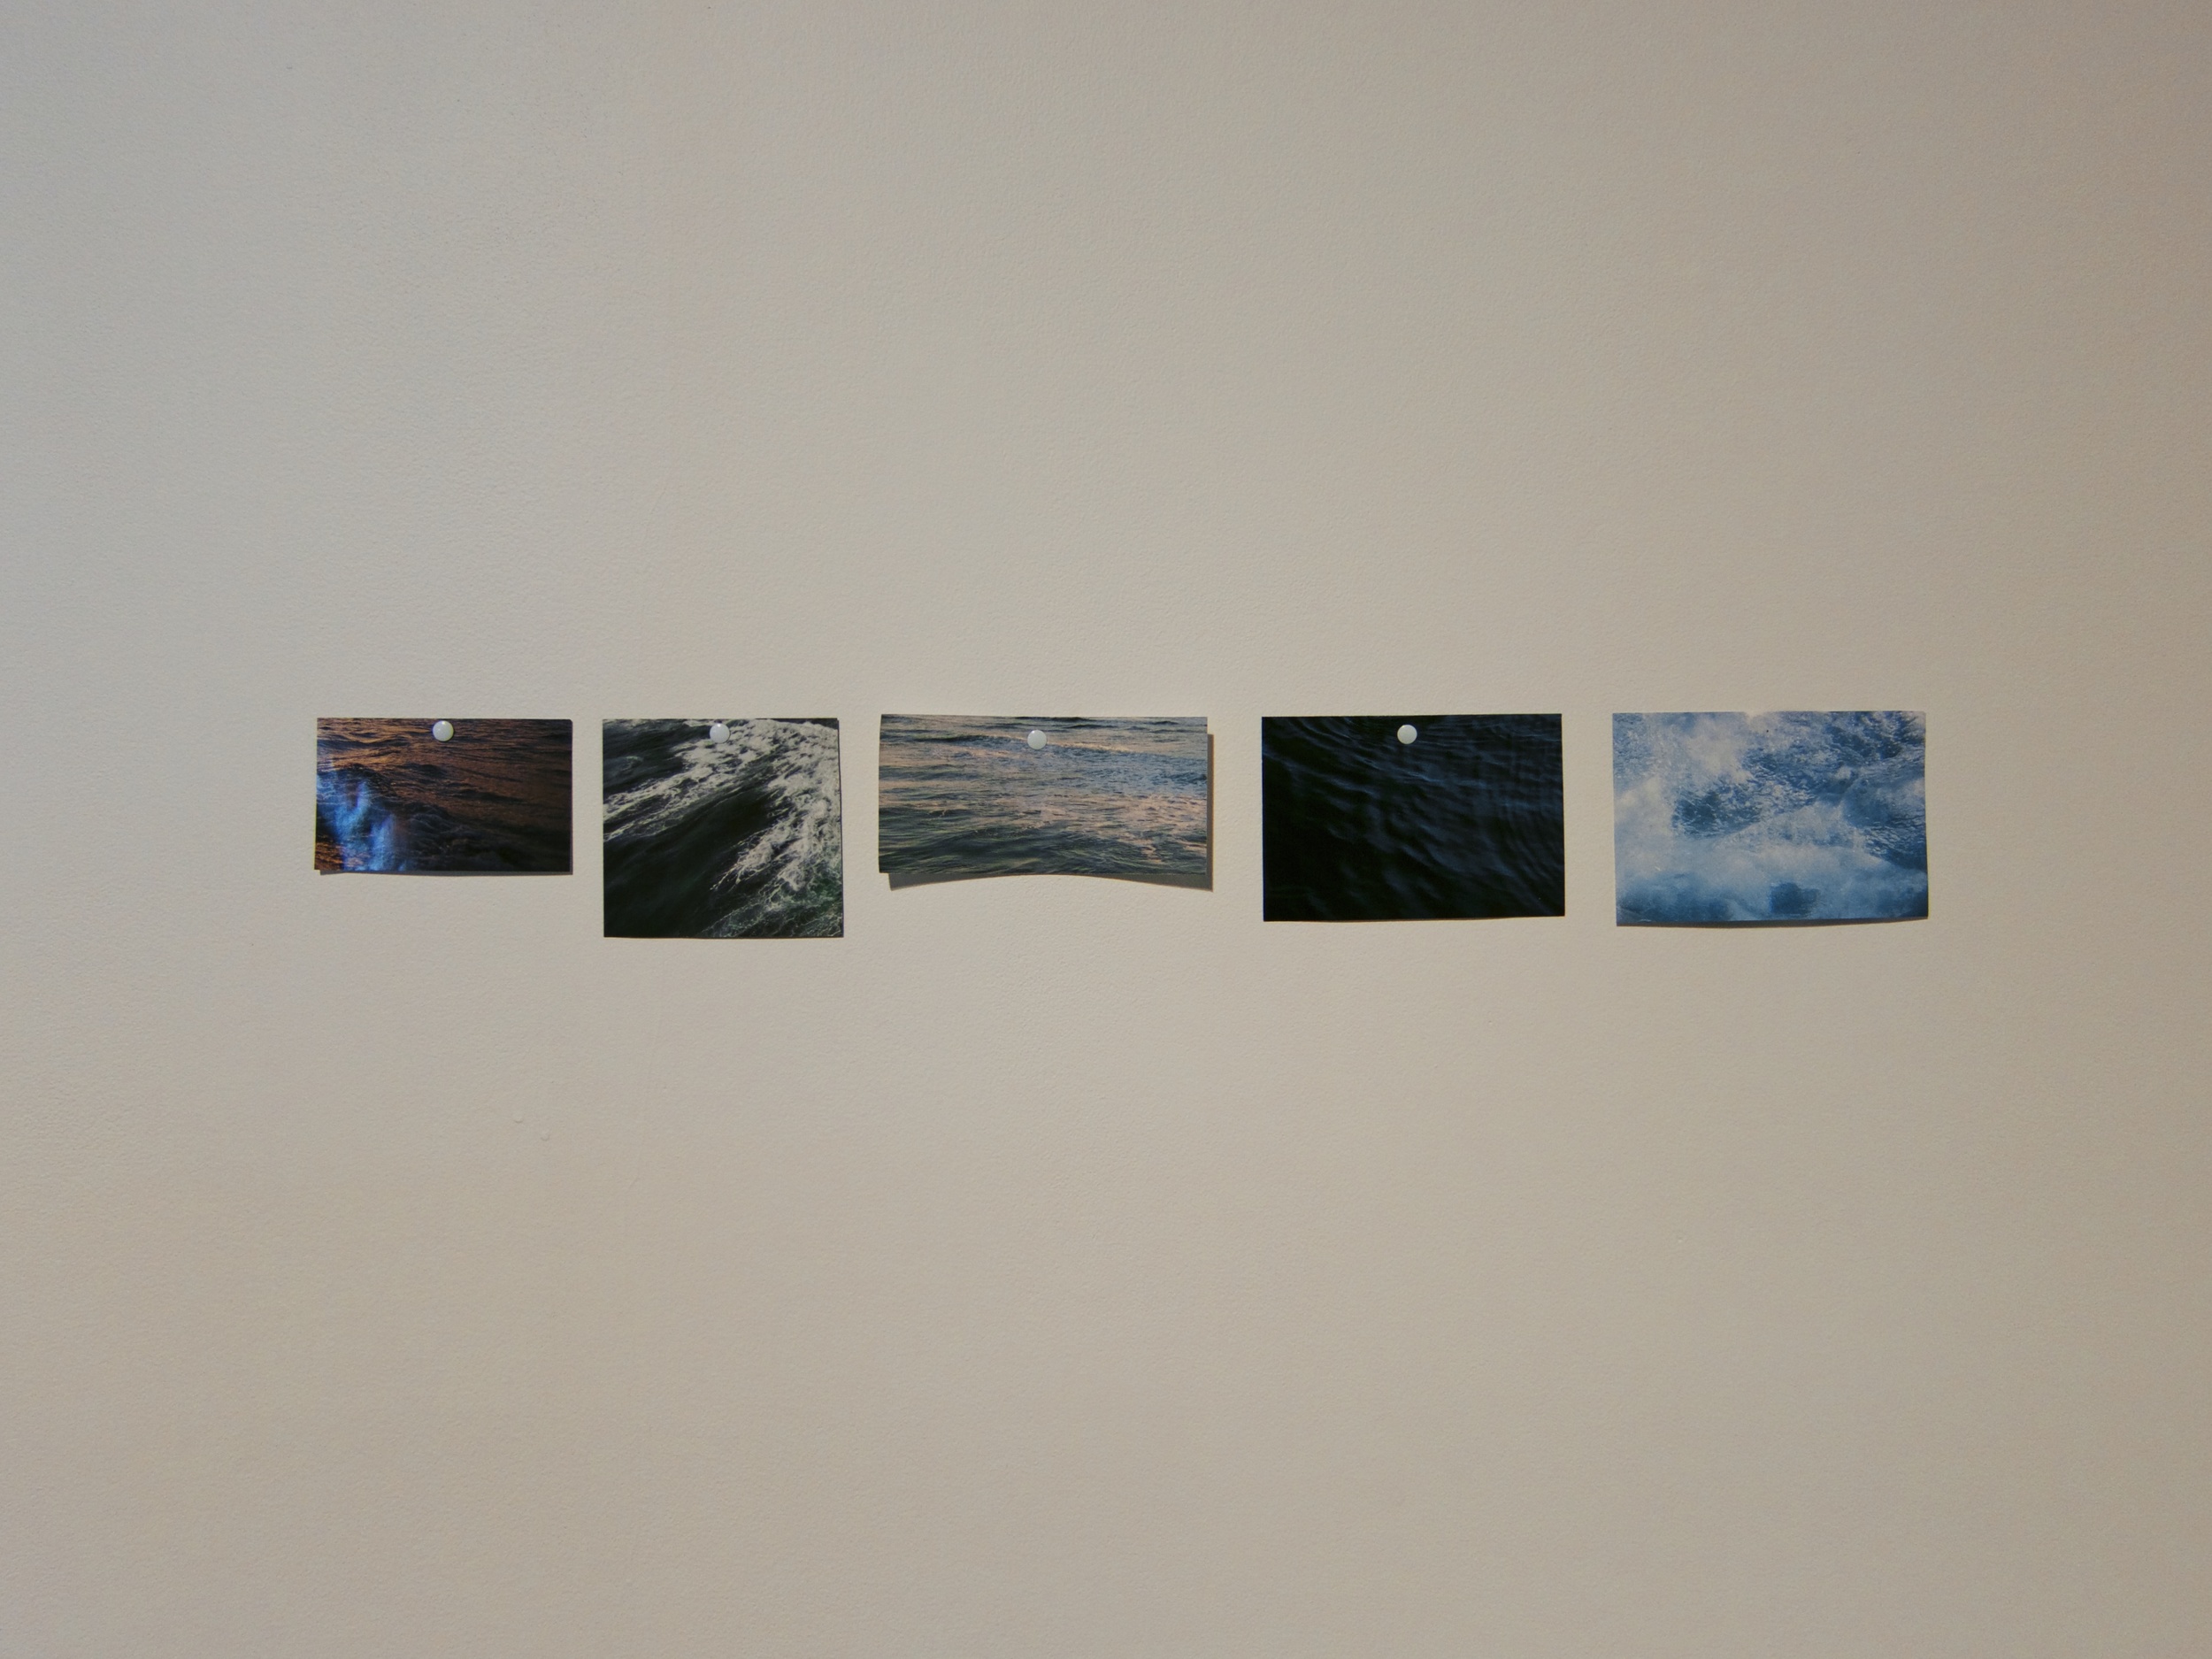  Pinned cut out National Geographic images of water, 20x6 inches, 2014. 